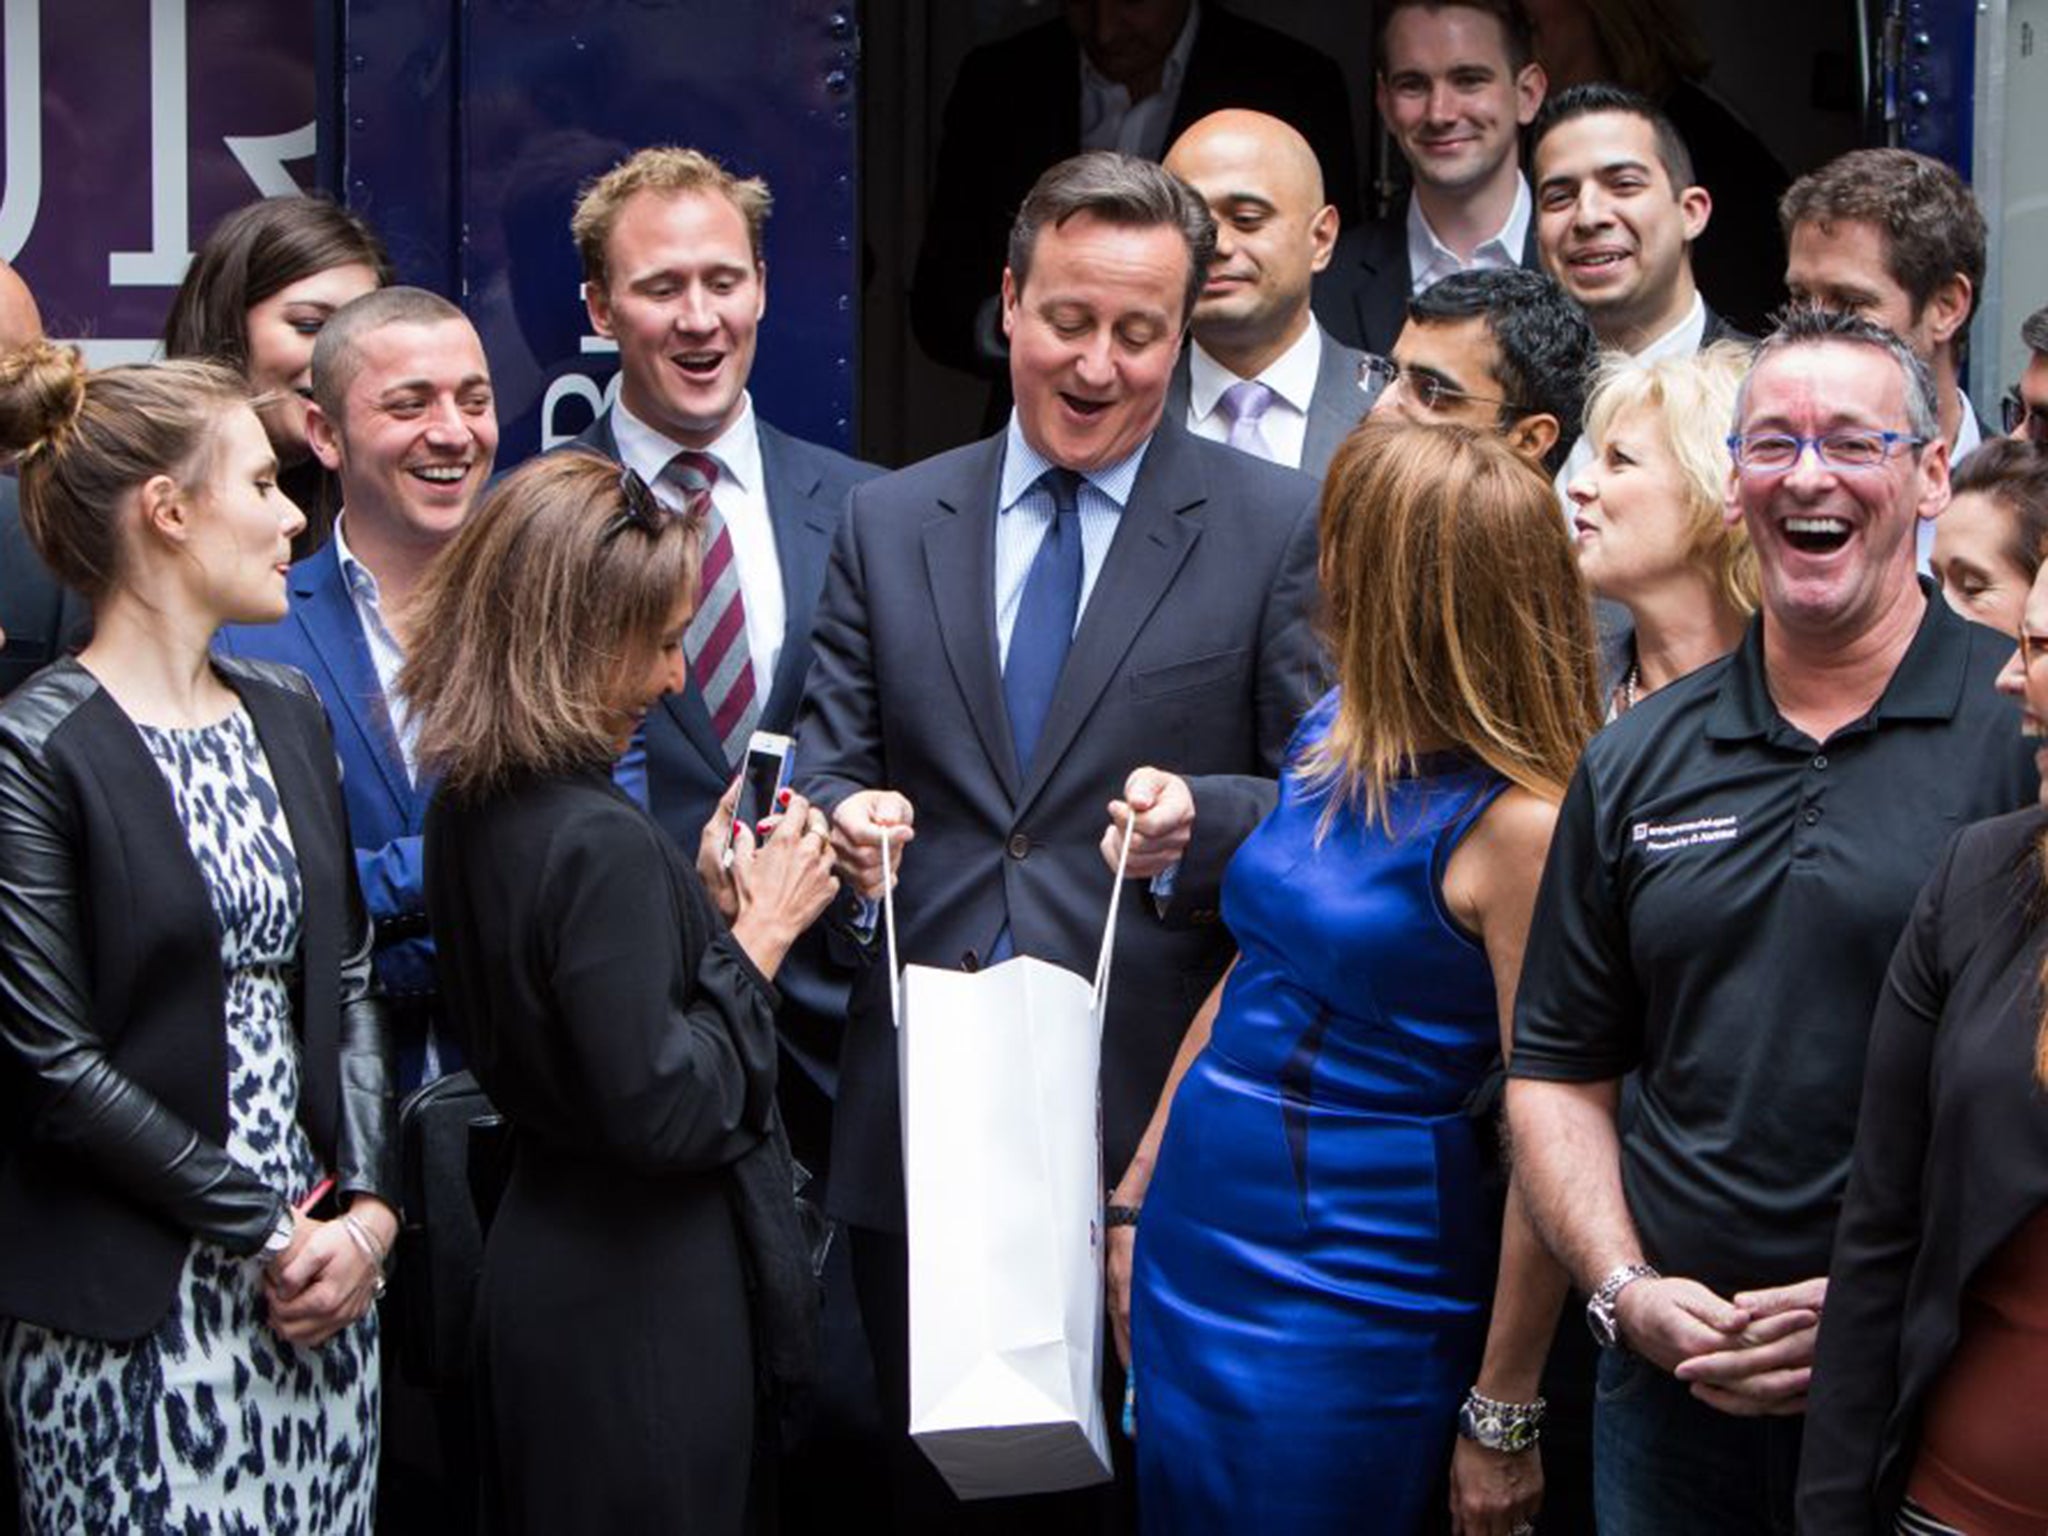 Prime Minister David Cameron receives a gift from mentors and supporters from StartUp Britain, a national campaign by Britain's leading business people to support businesses across the UK